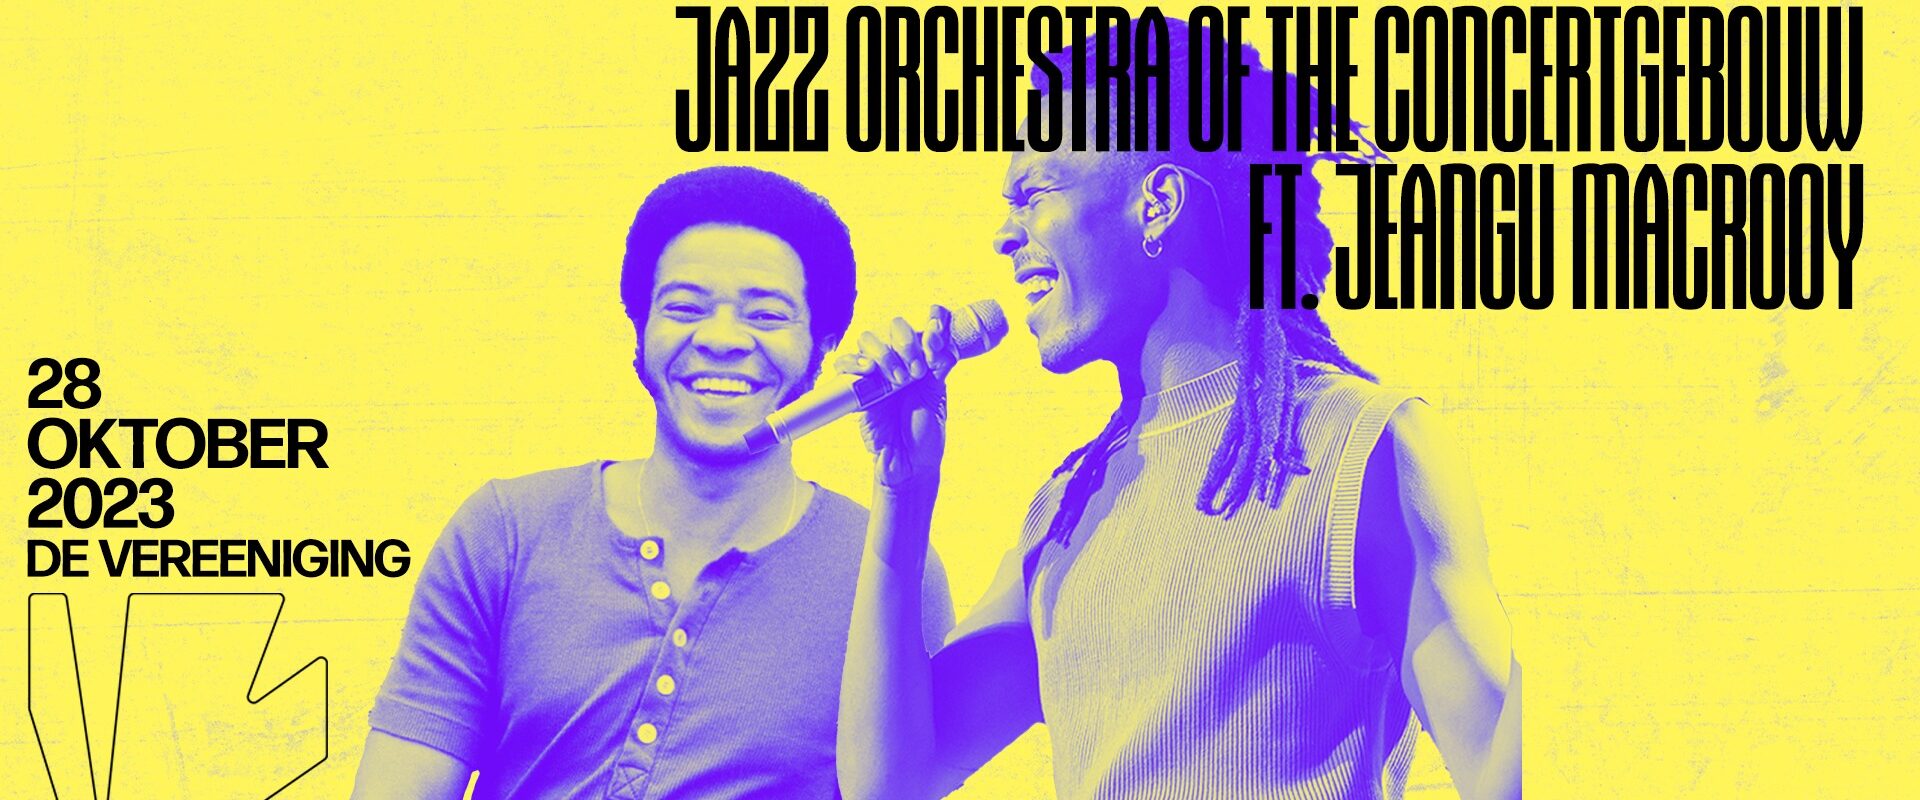 FJIN2023 | Jazz Orchestra of the Concertgebouw ft. Jeangu Macrooy 1